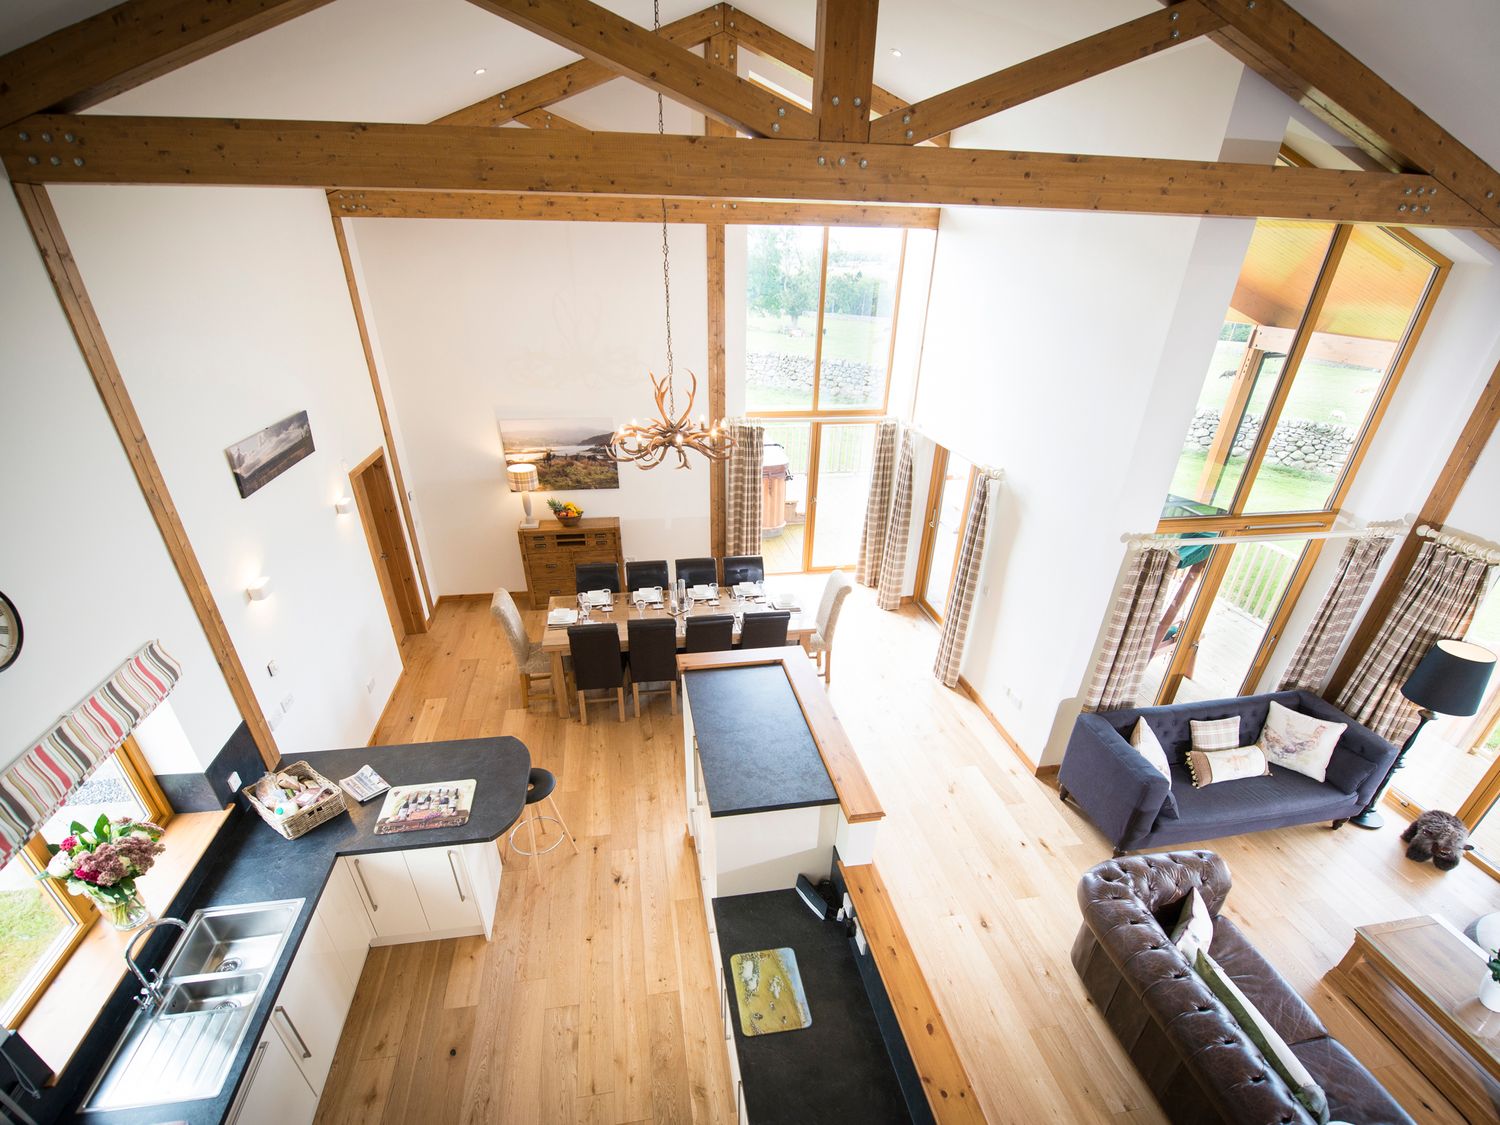 Atlas, Cawdor, Highlands Four-bedroom log cabin with rural views. Family-friendly. Hot tub and sauna